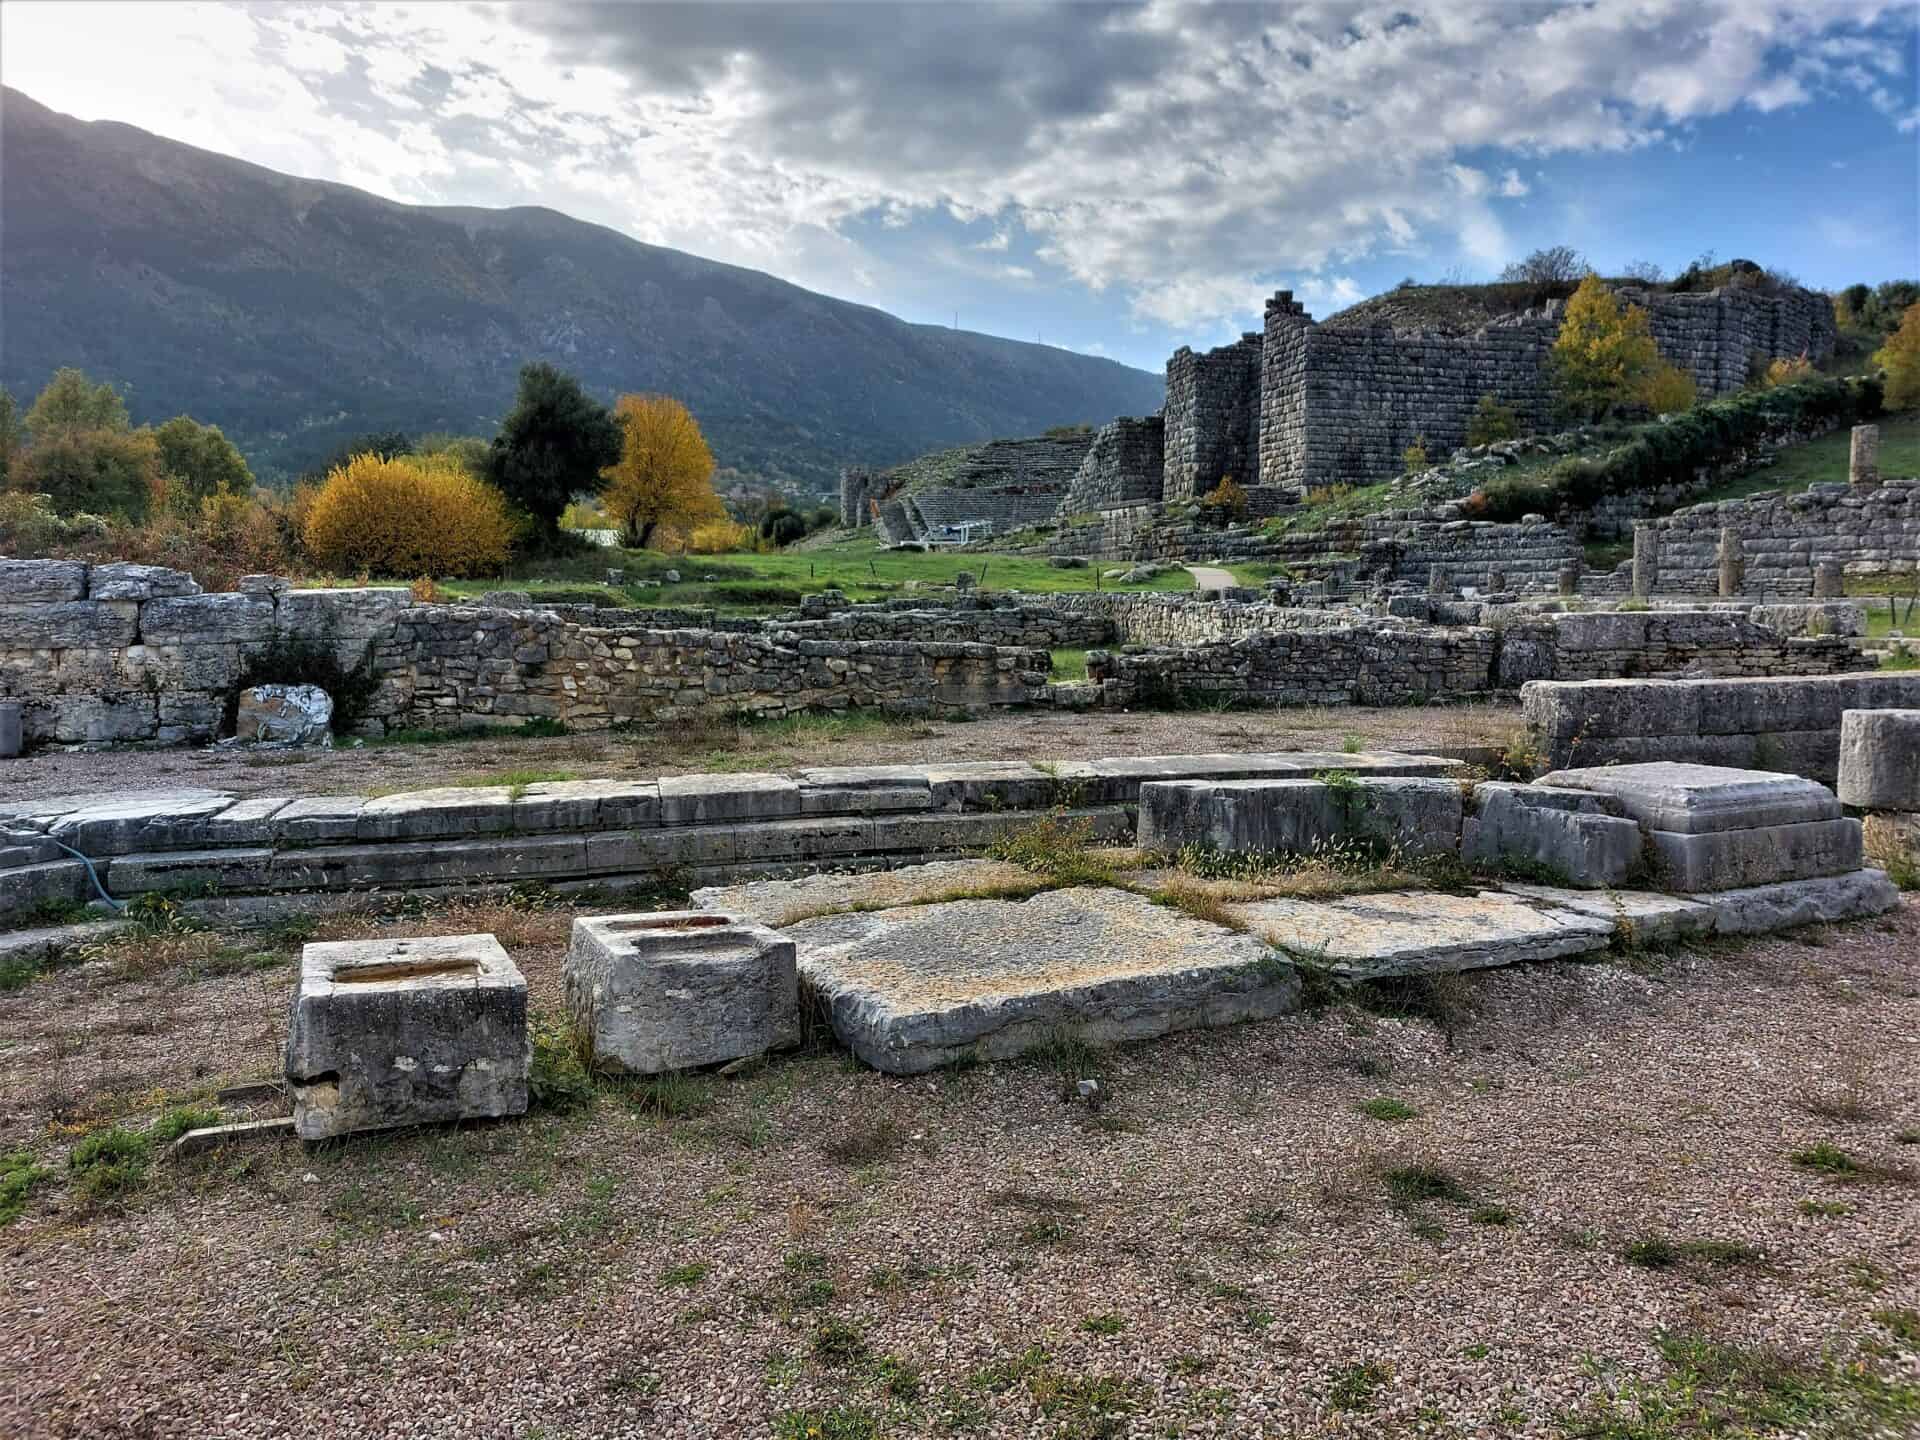 remains of Roman ruins and a massive Greek theatre in front of towering mountains